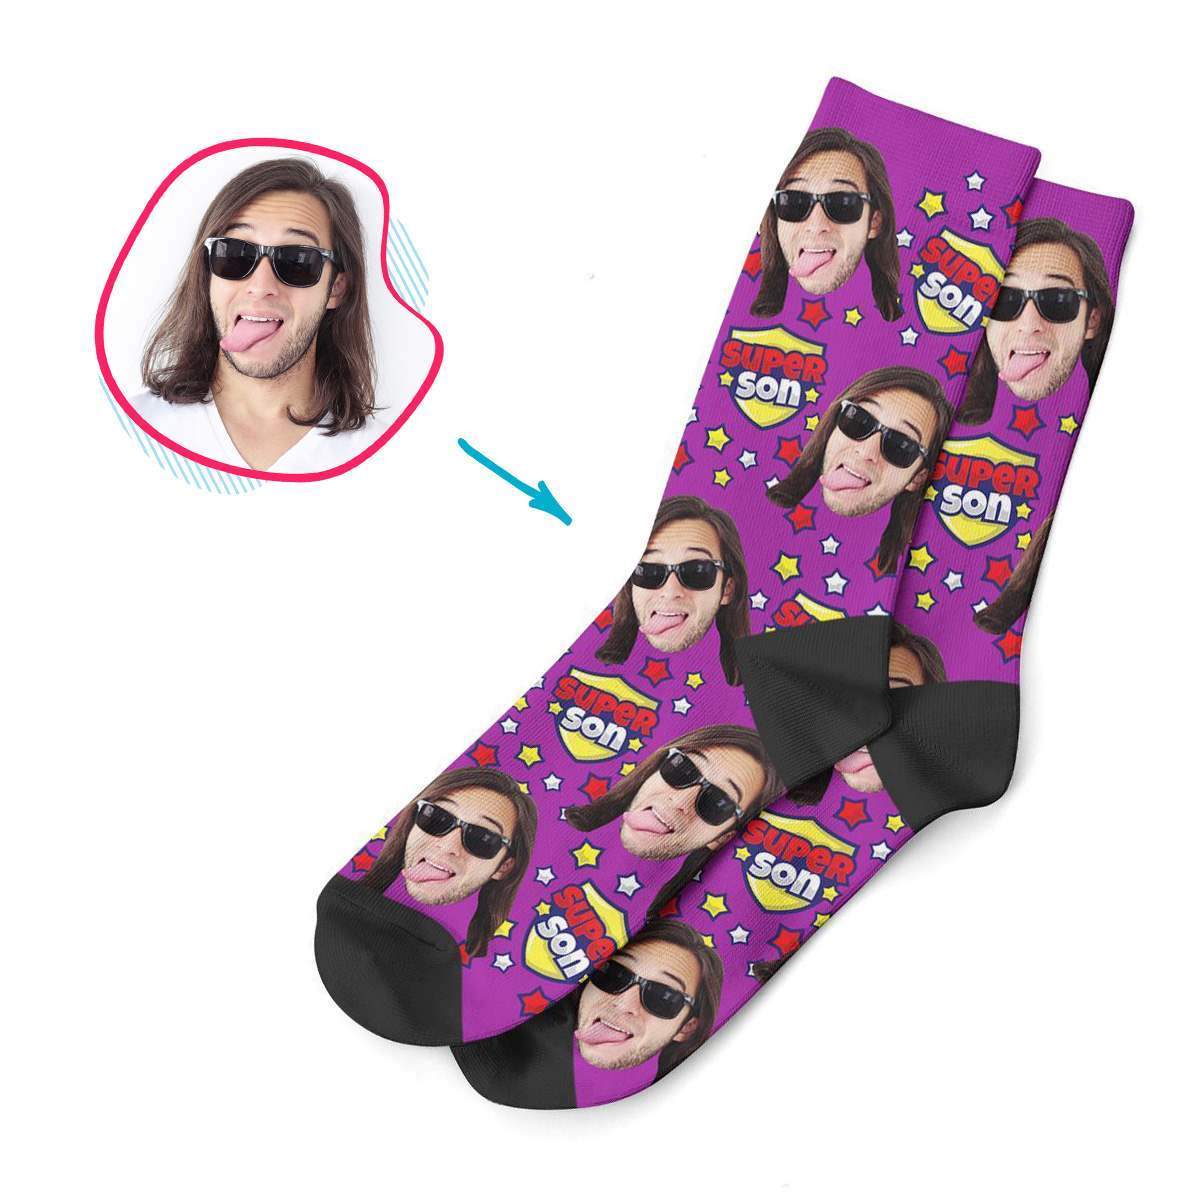 purple Super Son socks personalized with photo of face printed on them